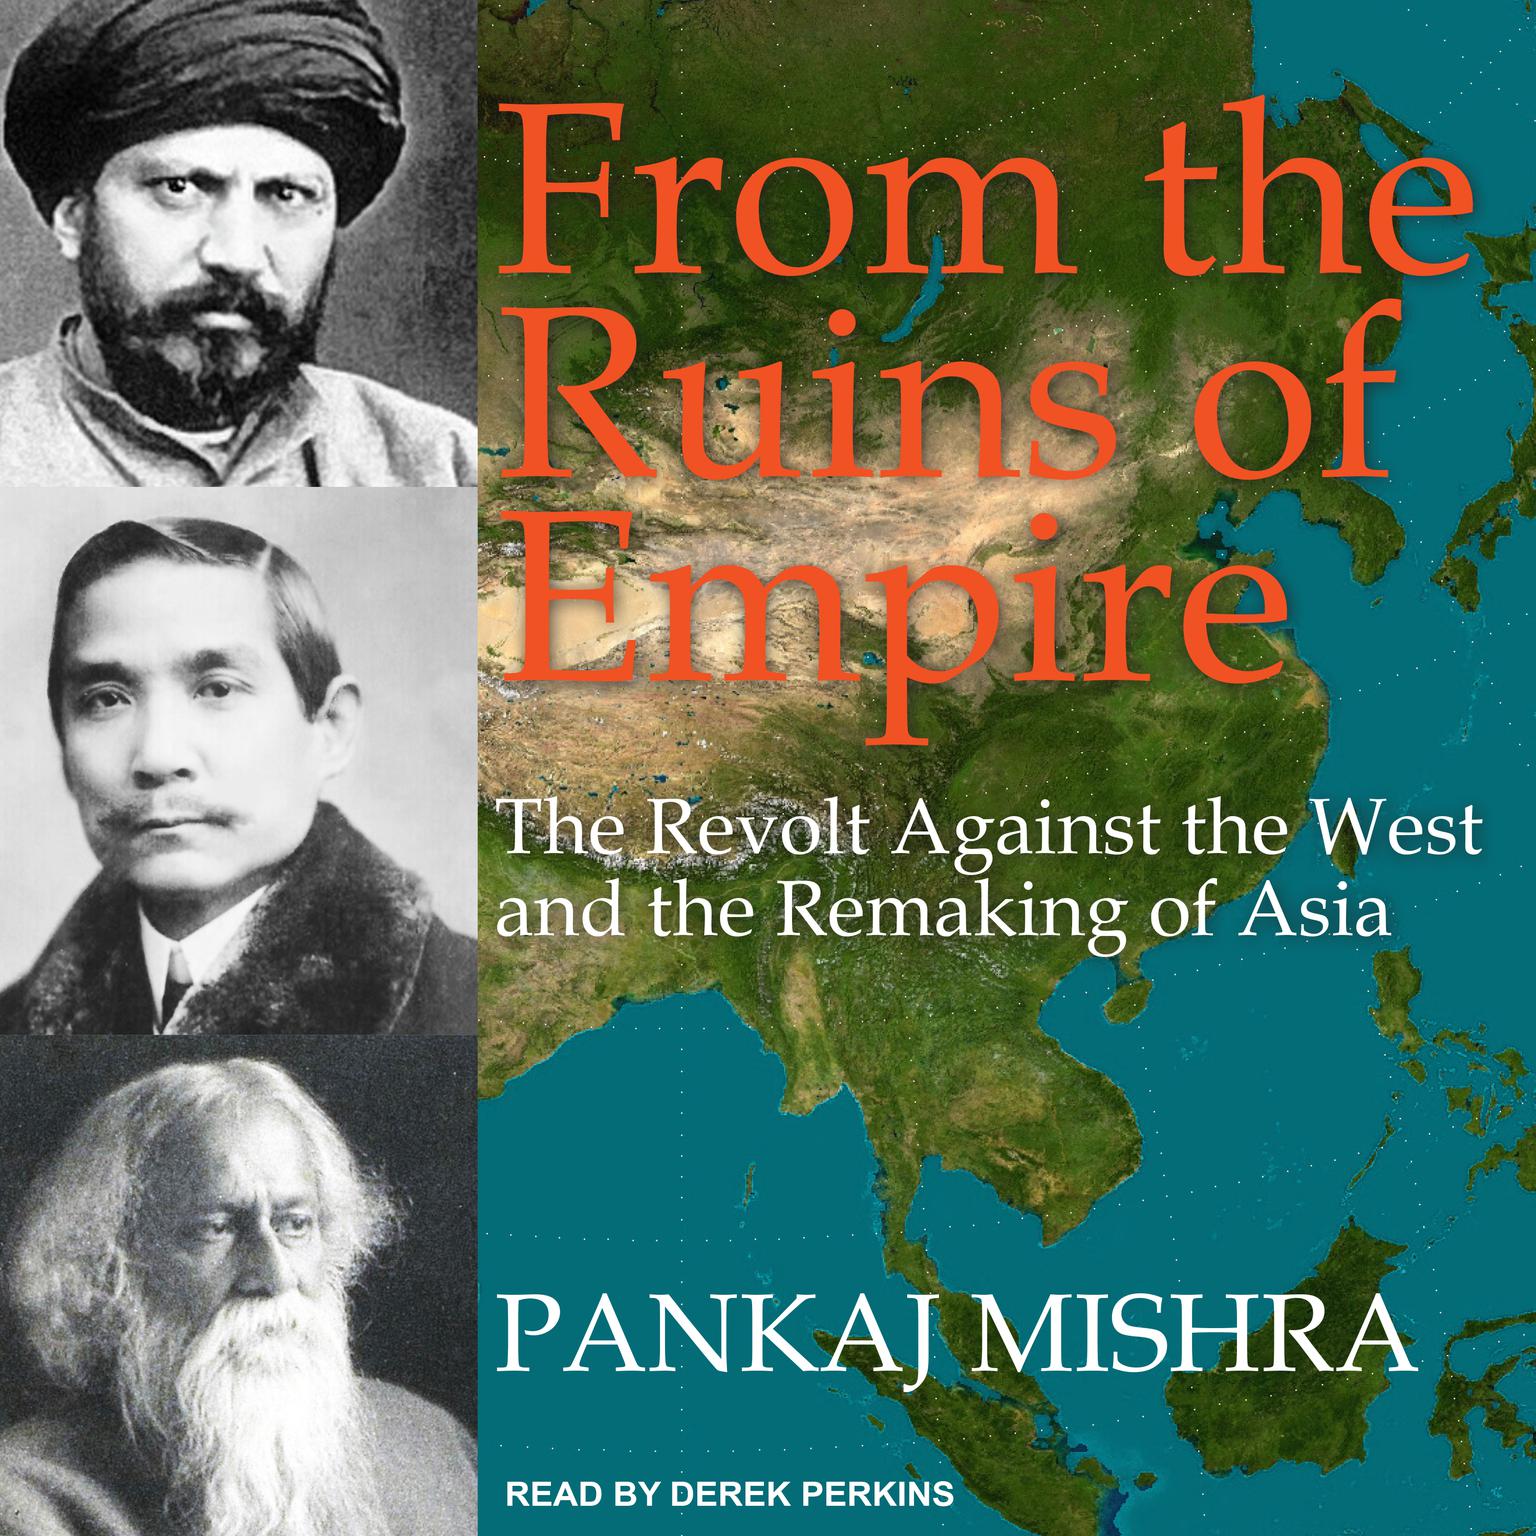 From the Ruins of Empire: The Revolt Against the West and the Remaking of Asia Audiobook, by Pankaj Mishra